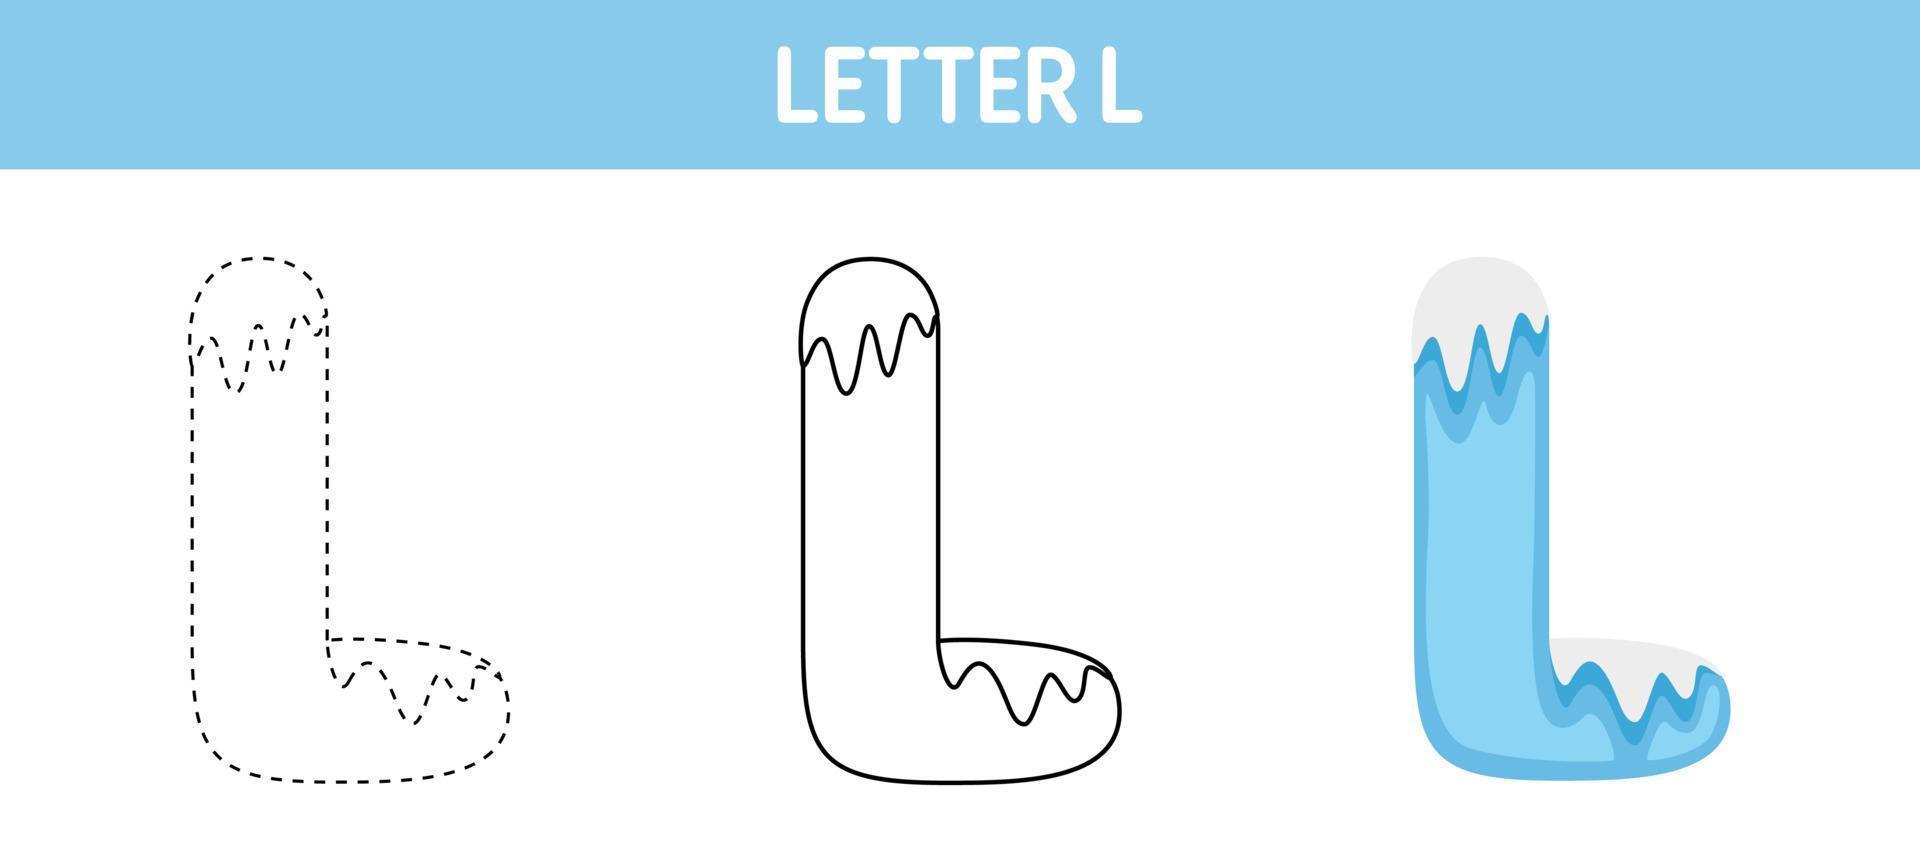 Letter L Snow tracing and coloring worksheet for kids vector